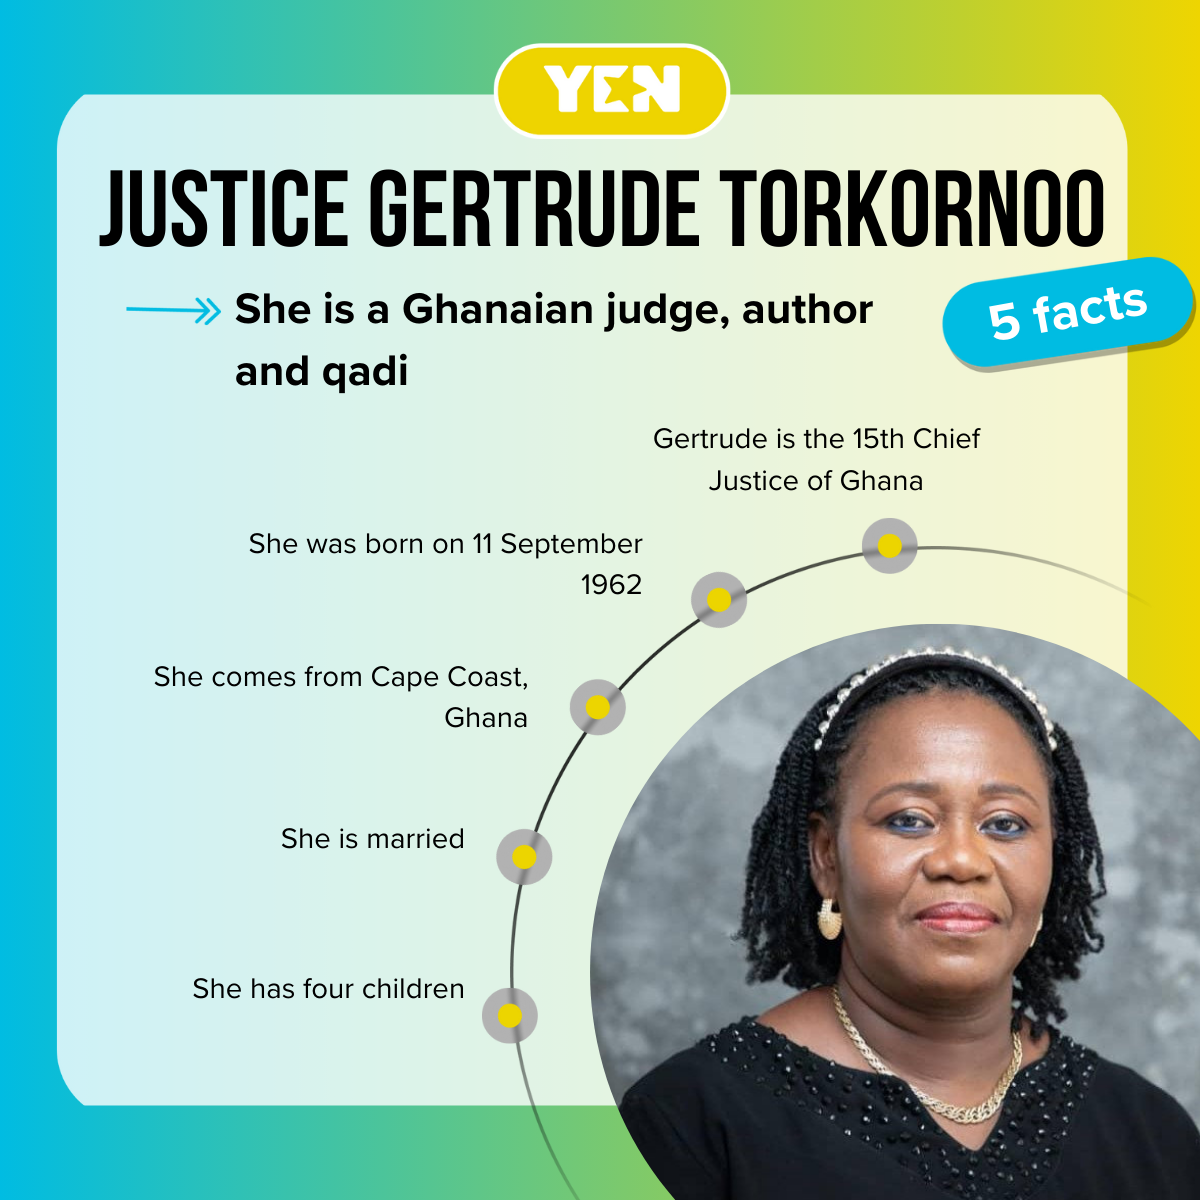 Gertrude Torkornoo is in a black outfit against a grey background